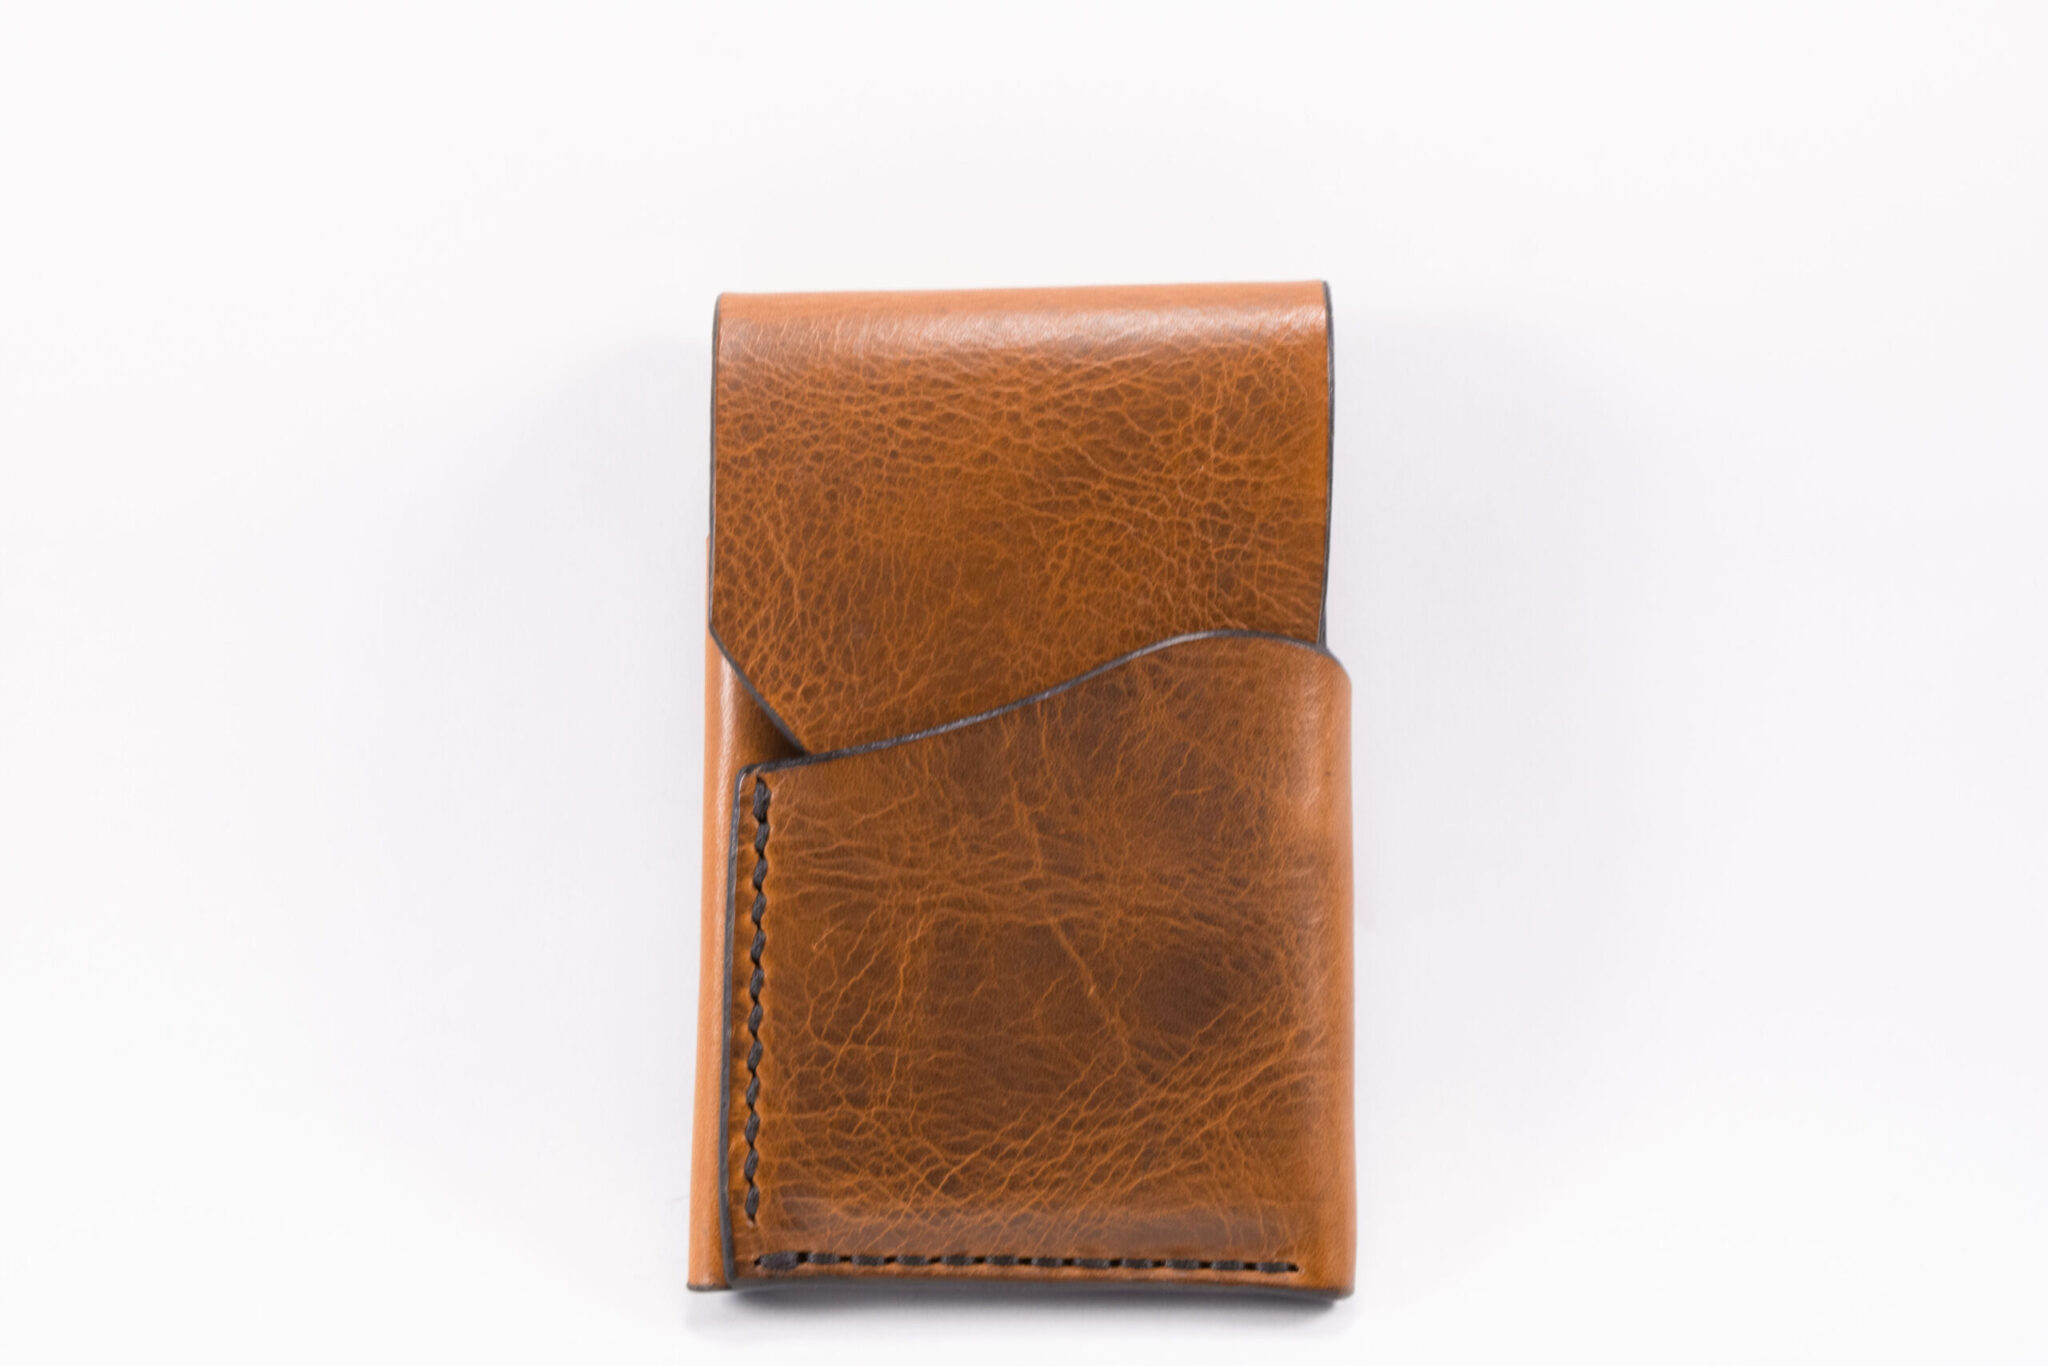 Product image of FredFloris slim leather credit card wallet